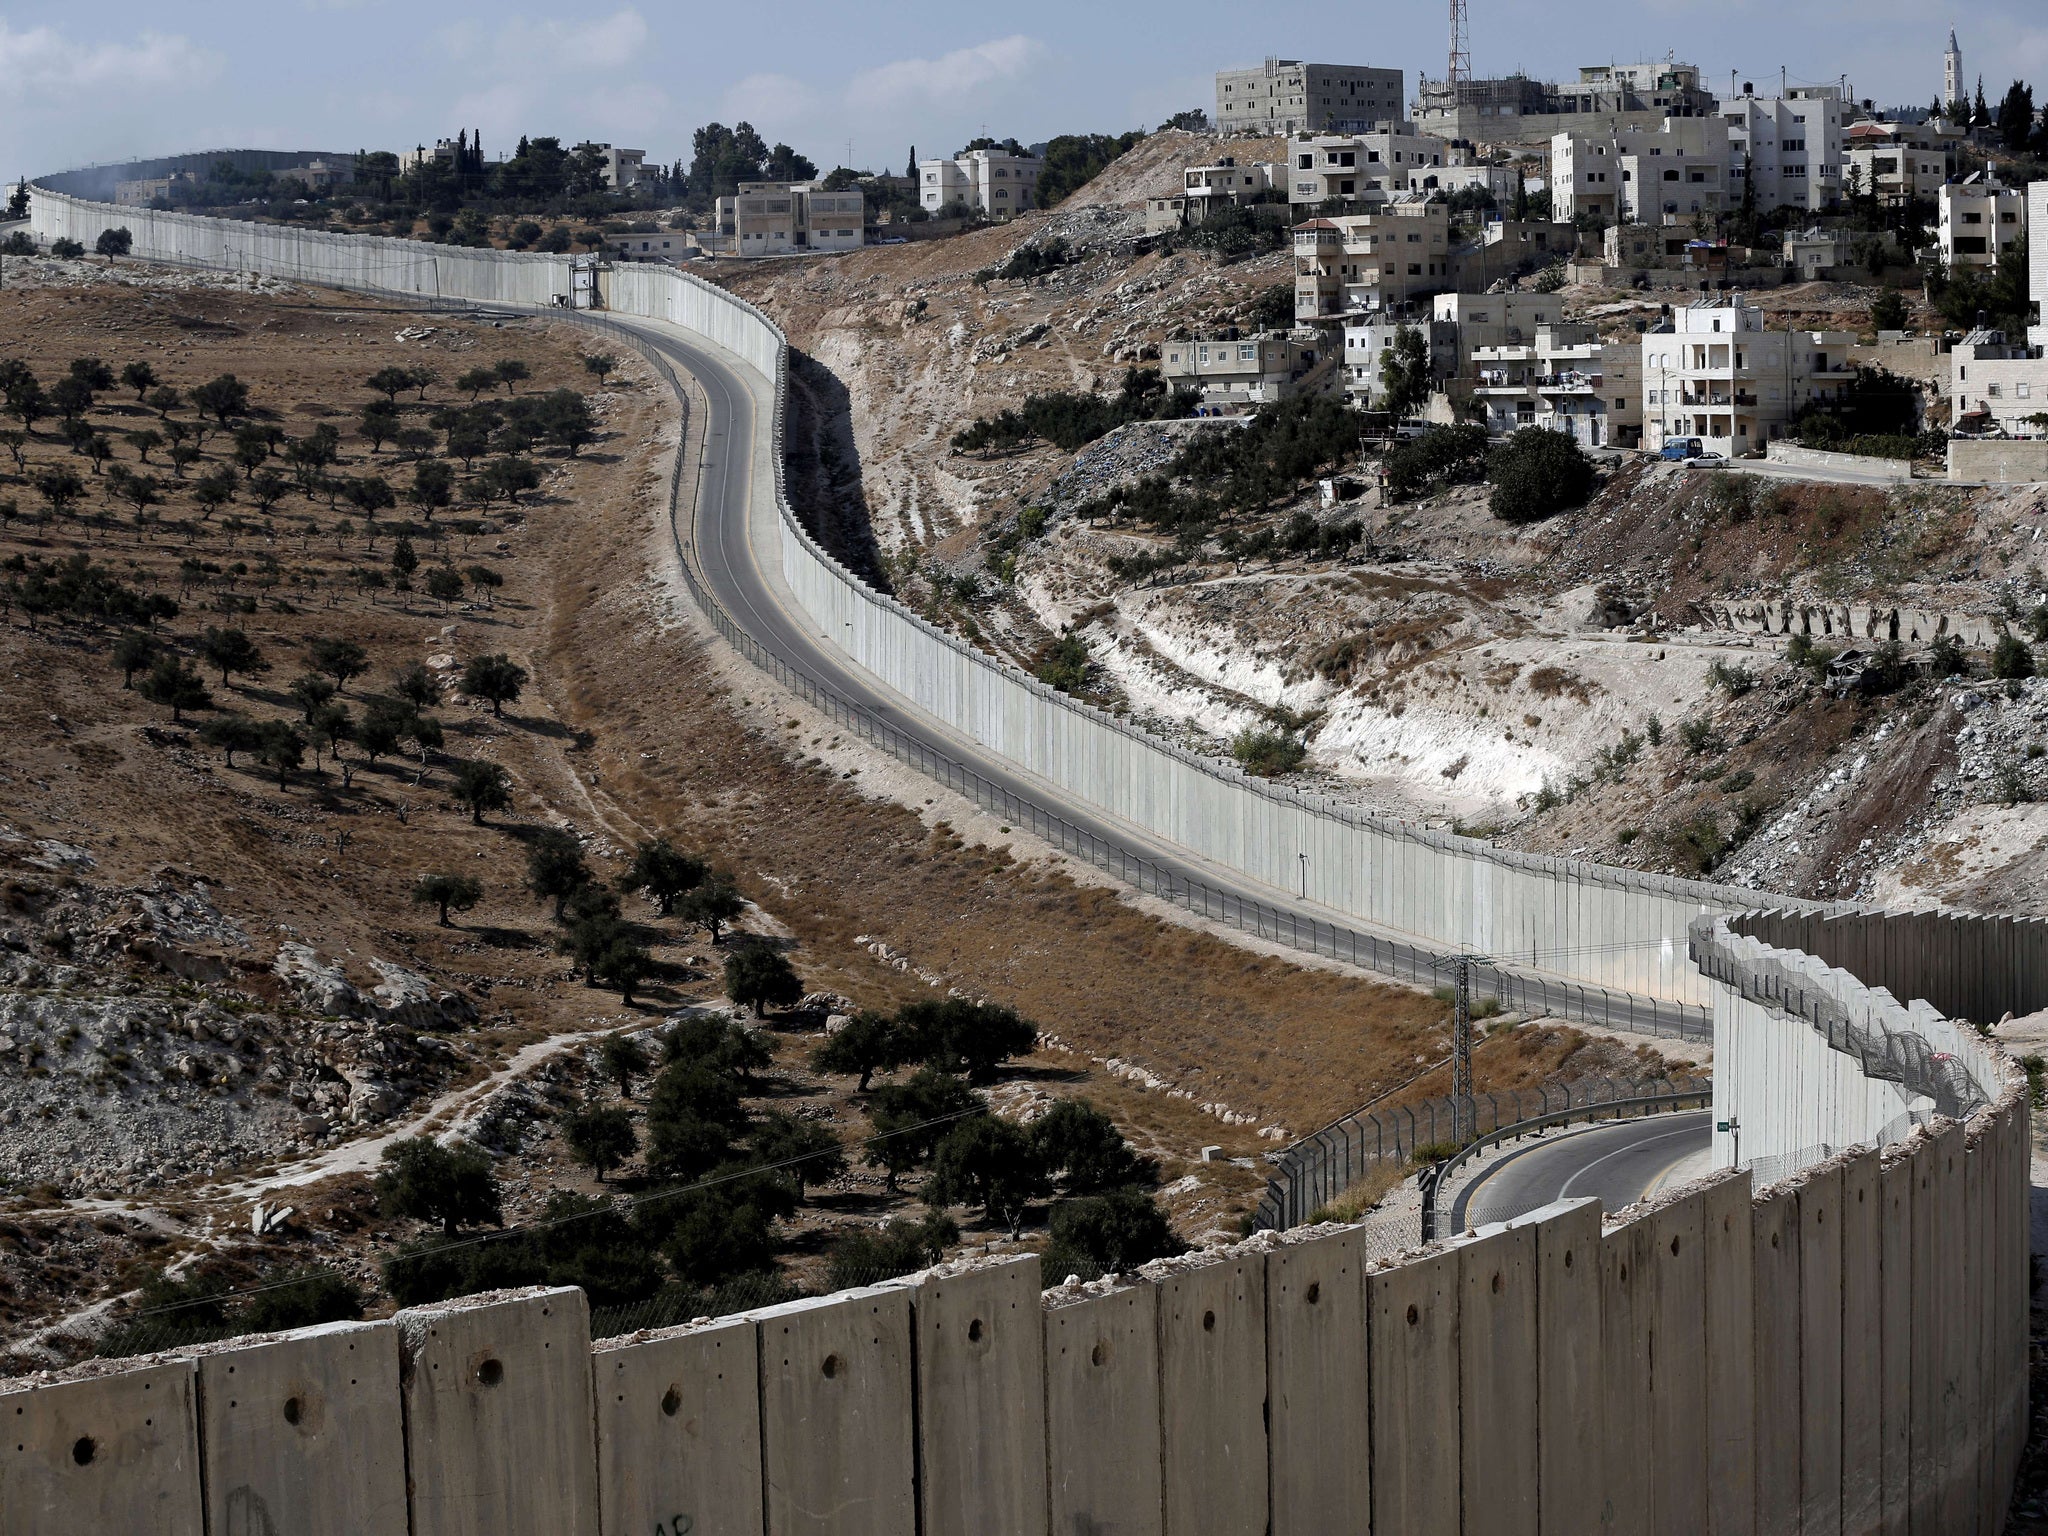 The Palestinian West bank city of Abu Dis is seen near the Israeli separation barrier